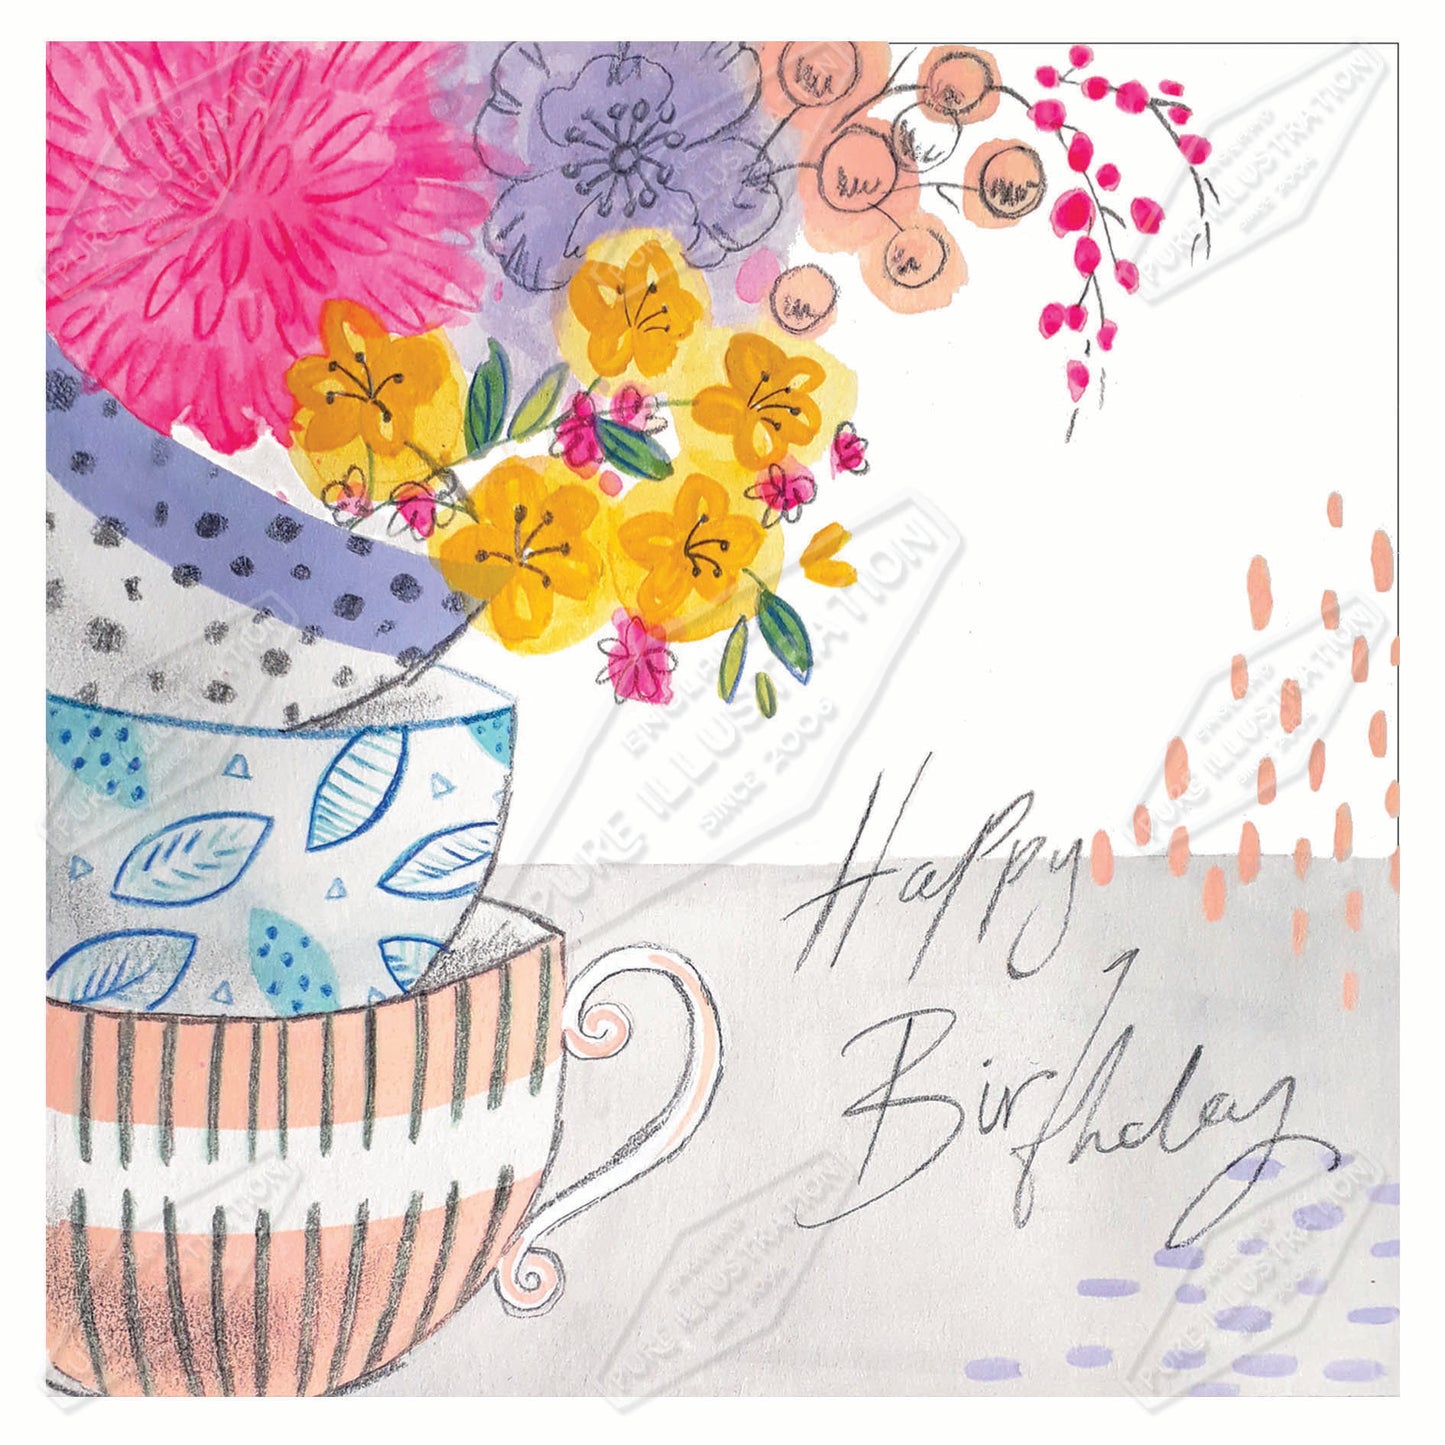 00035802AMA - Ally Marie is represented by Pure Art Licensing Agency - Birthday Greeting Card Design